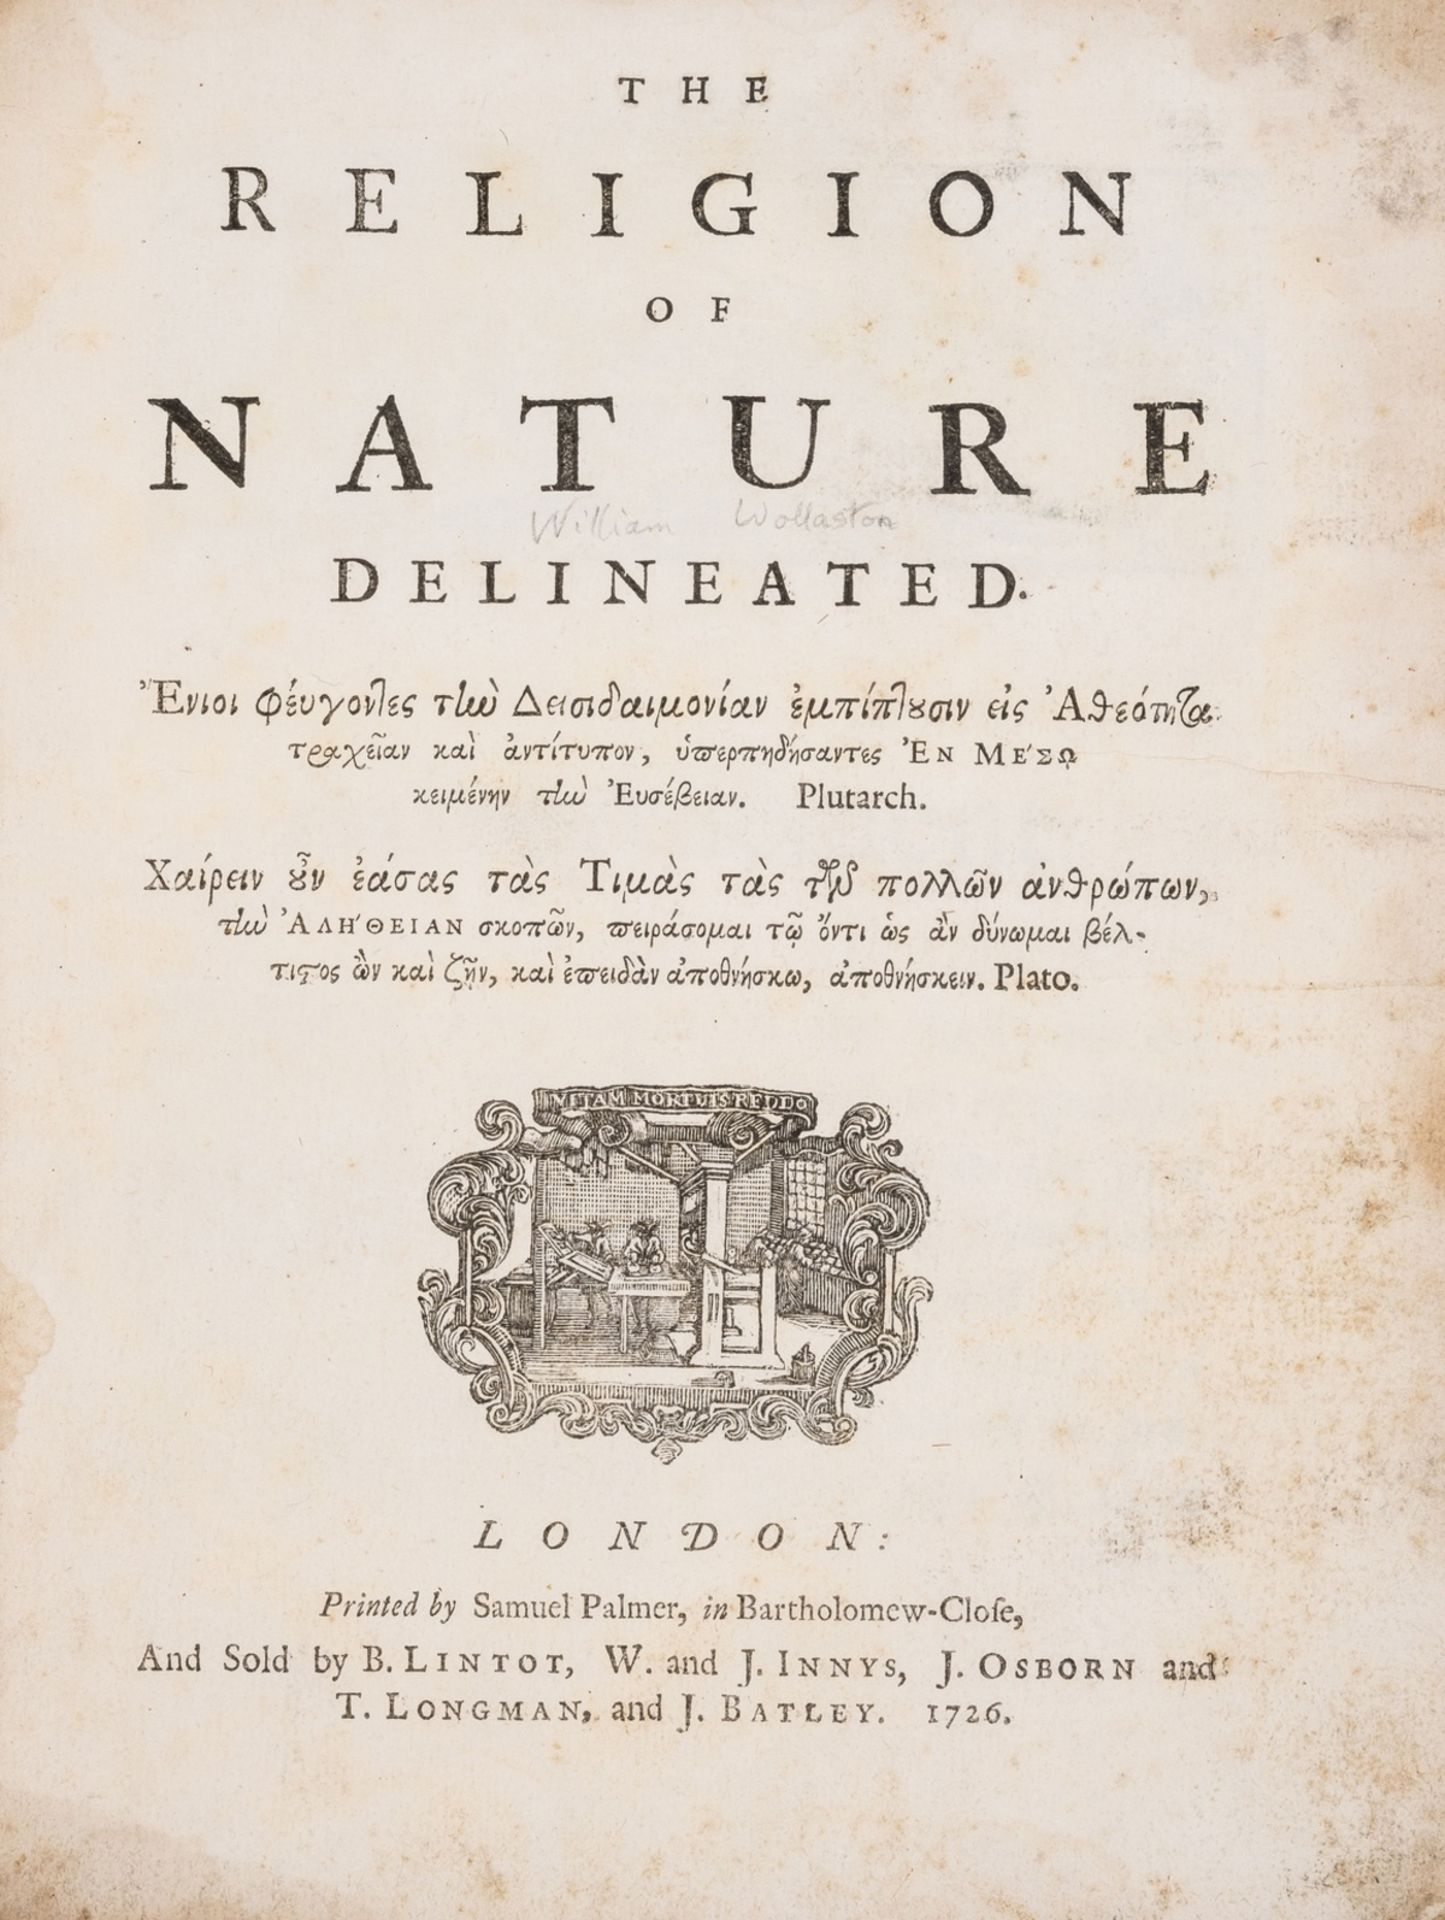 [Wollaston (William)] The Religion of Nature Delineated, 1726.